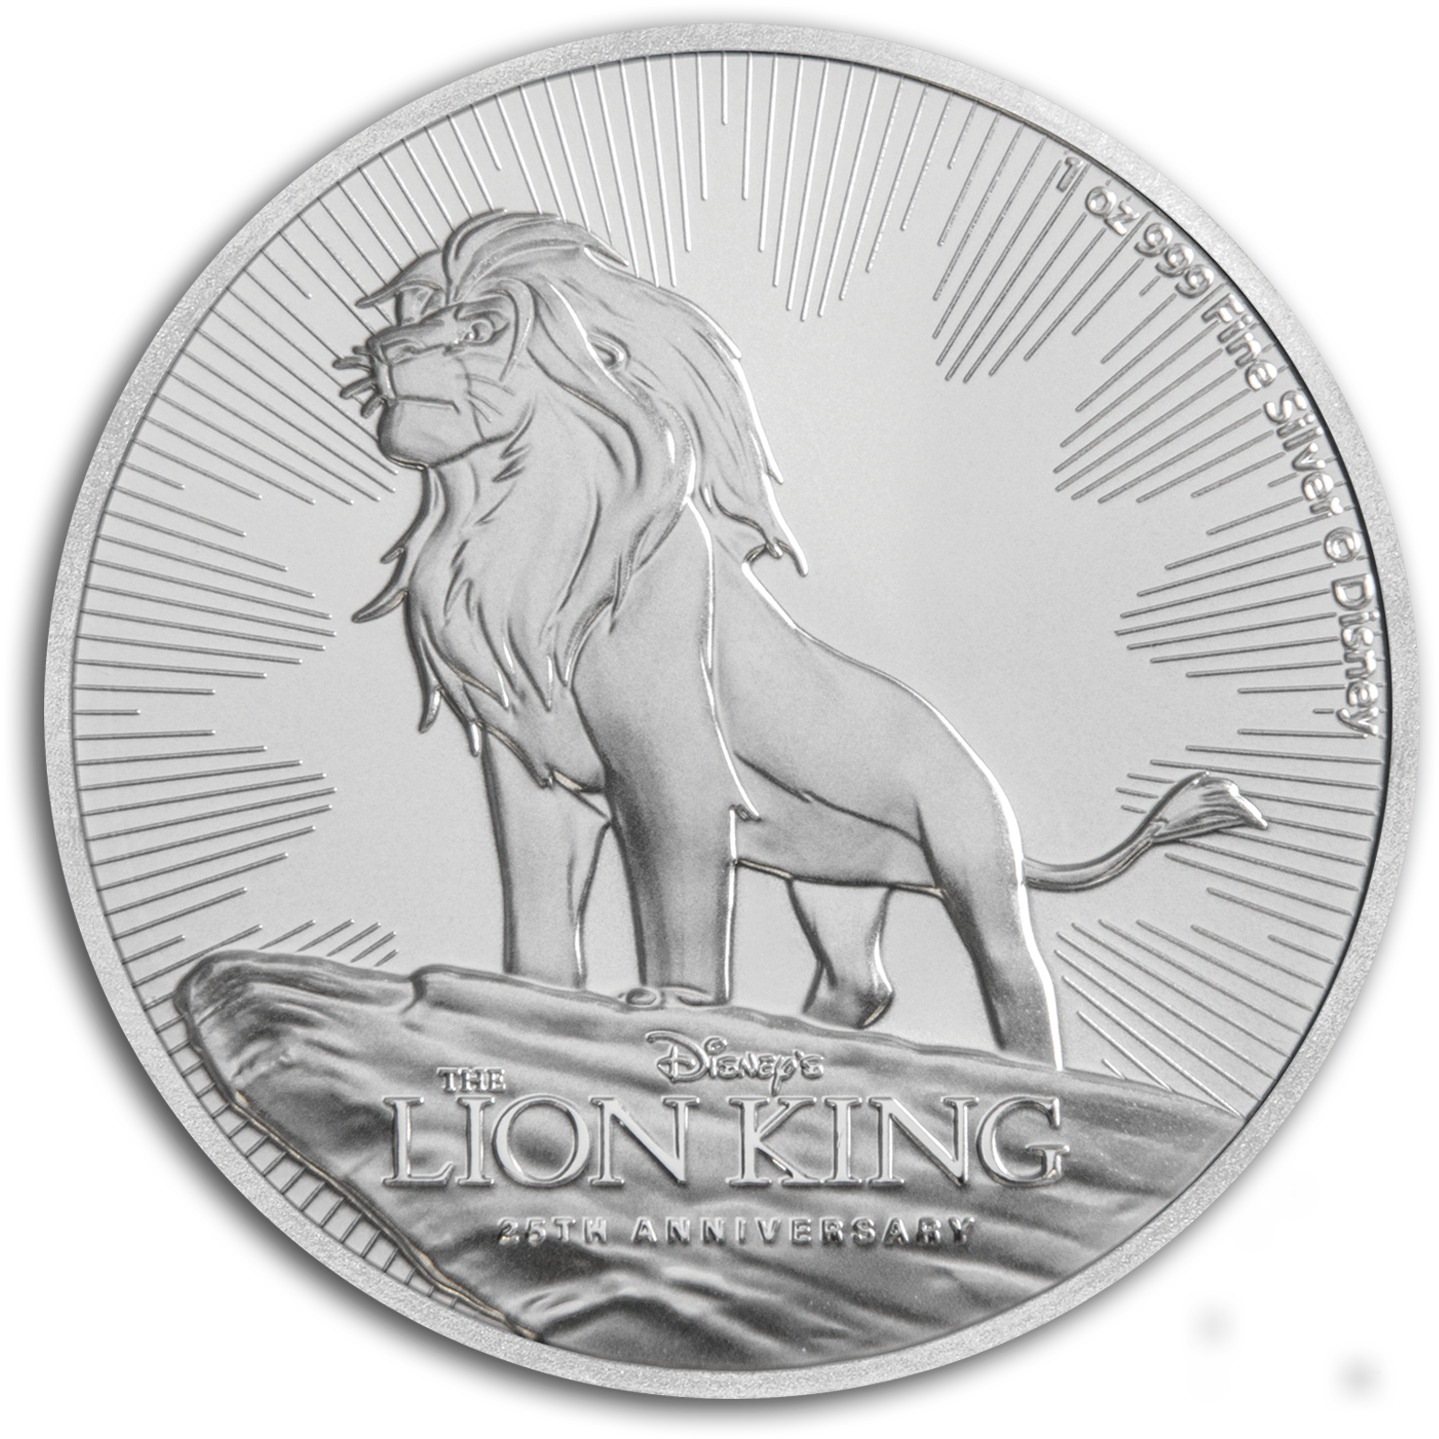 Lion King25th Anniversary Coin PNG